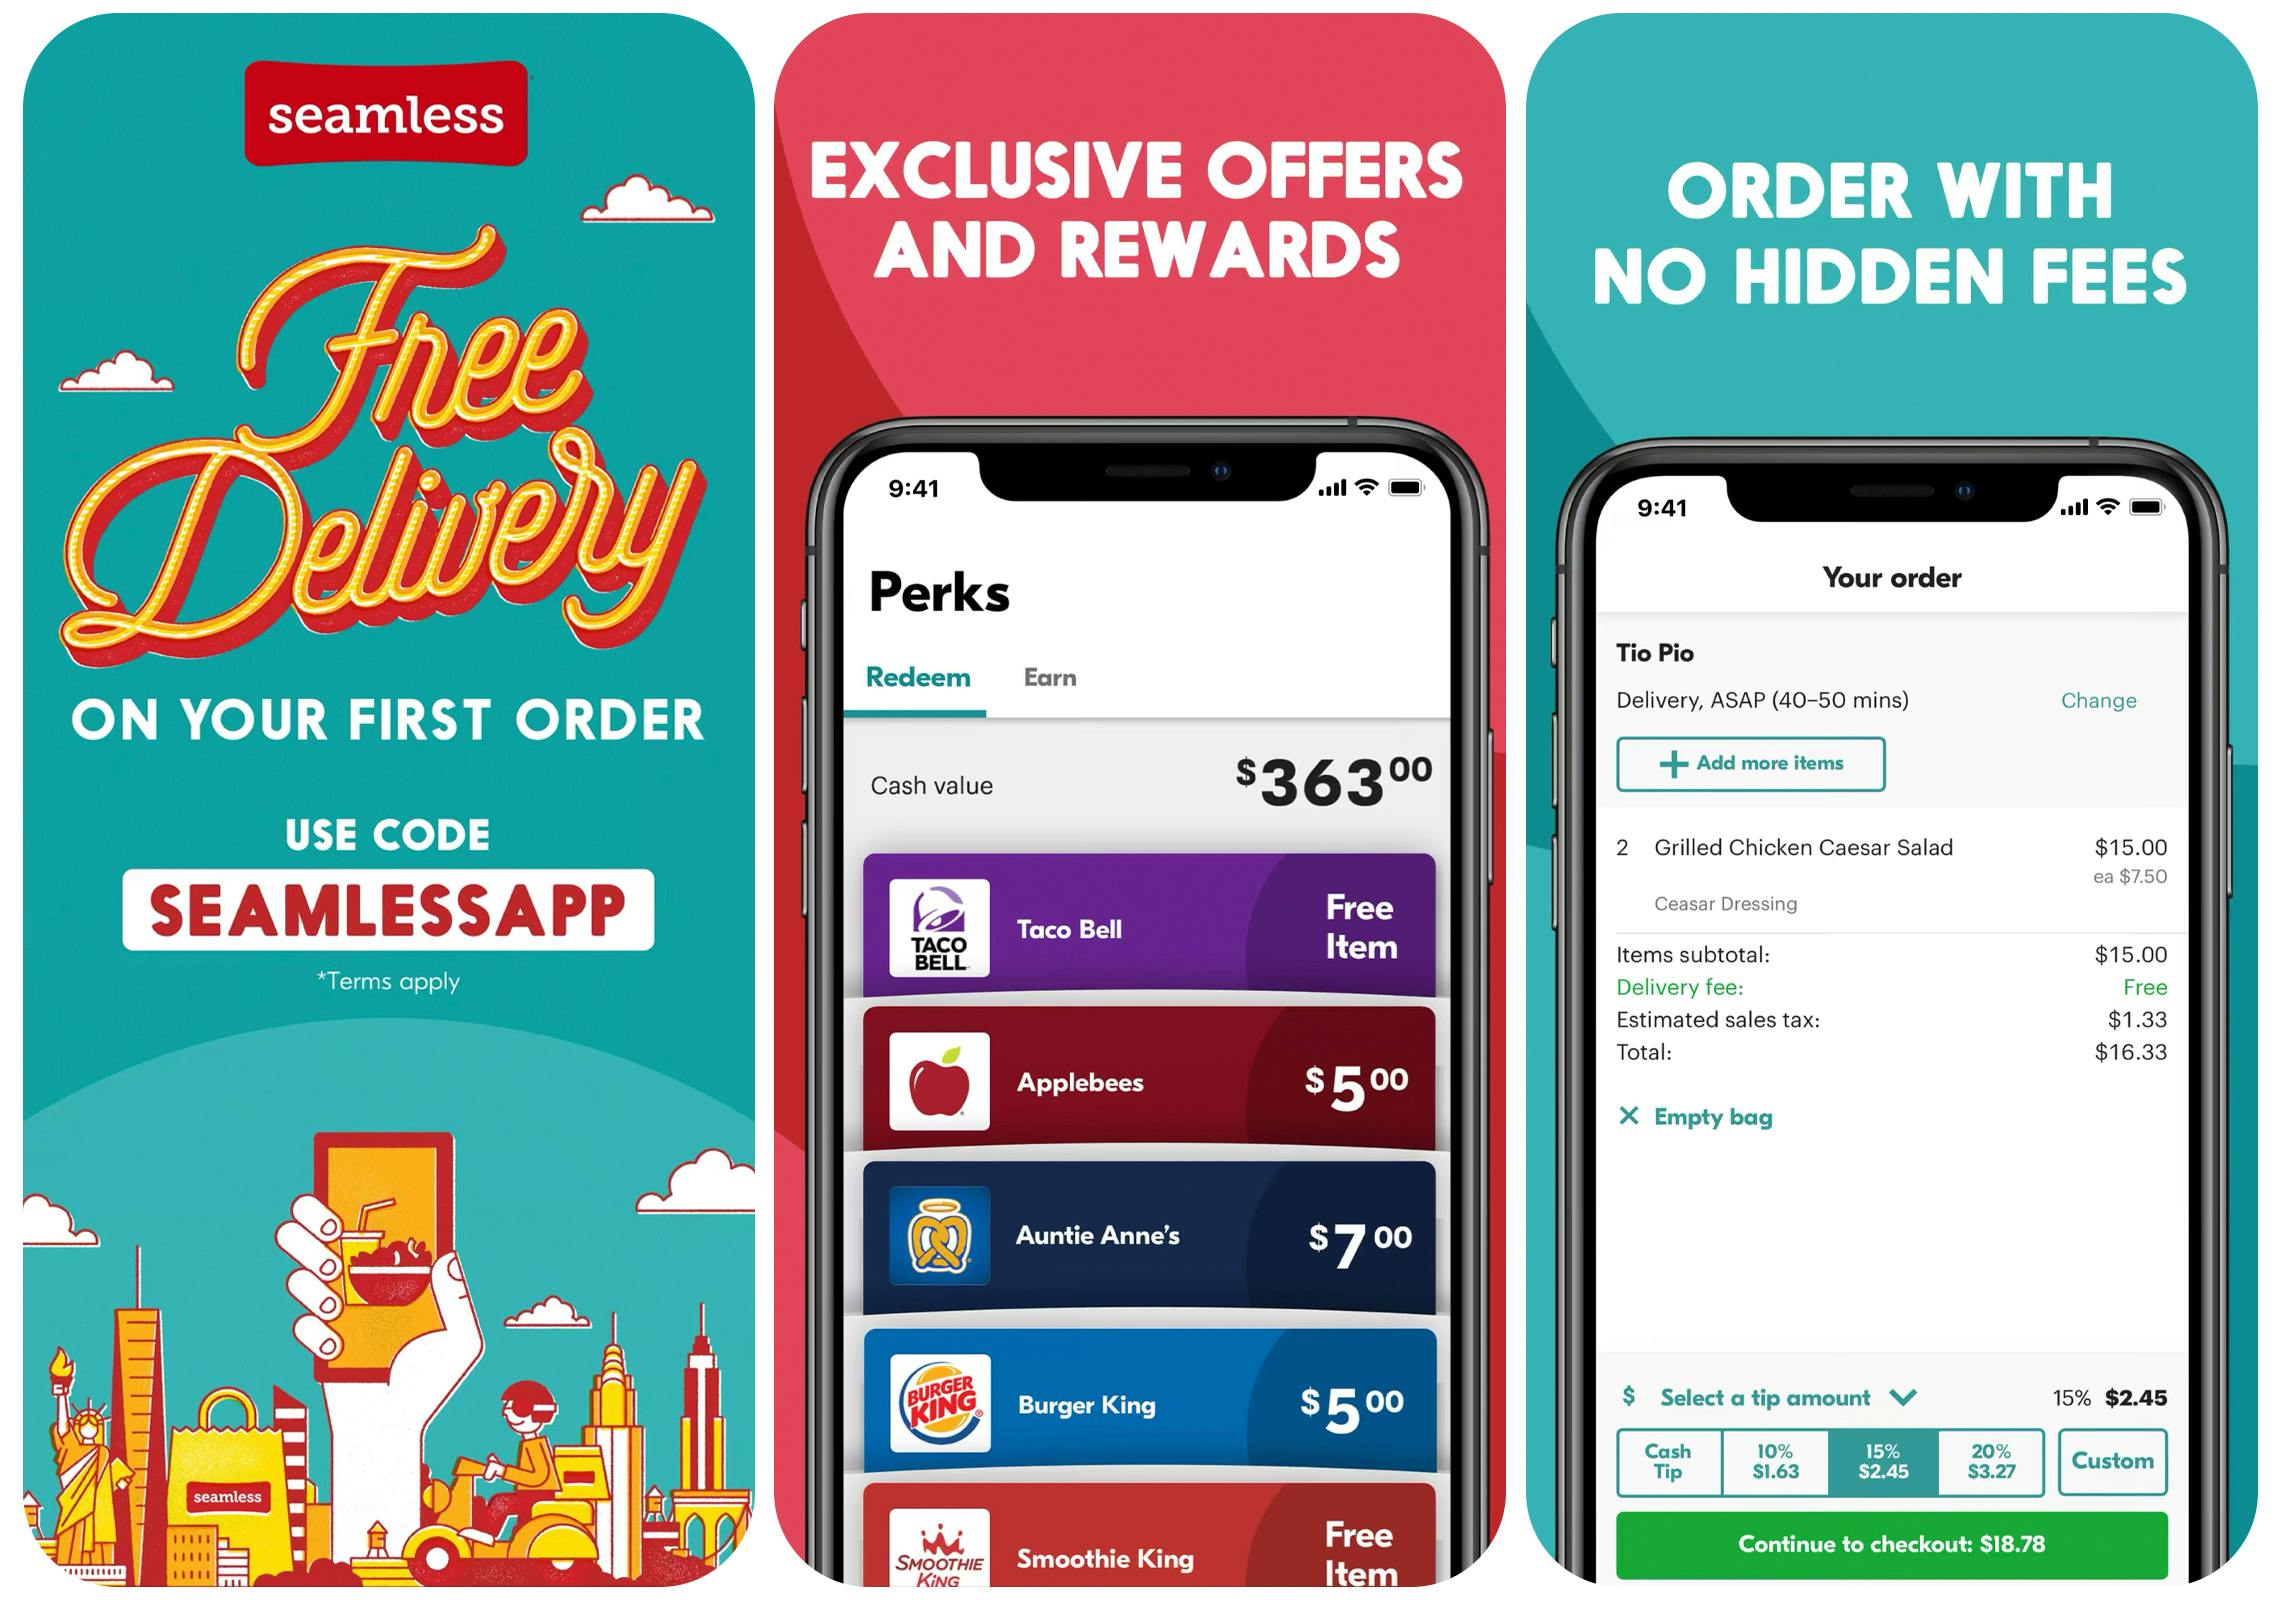 Here's How to Find Free Food Delivery Near You - The Krazy Coupon Lady